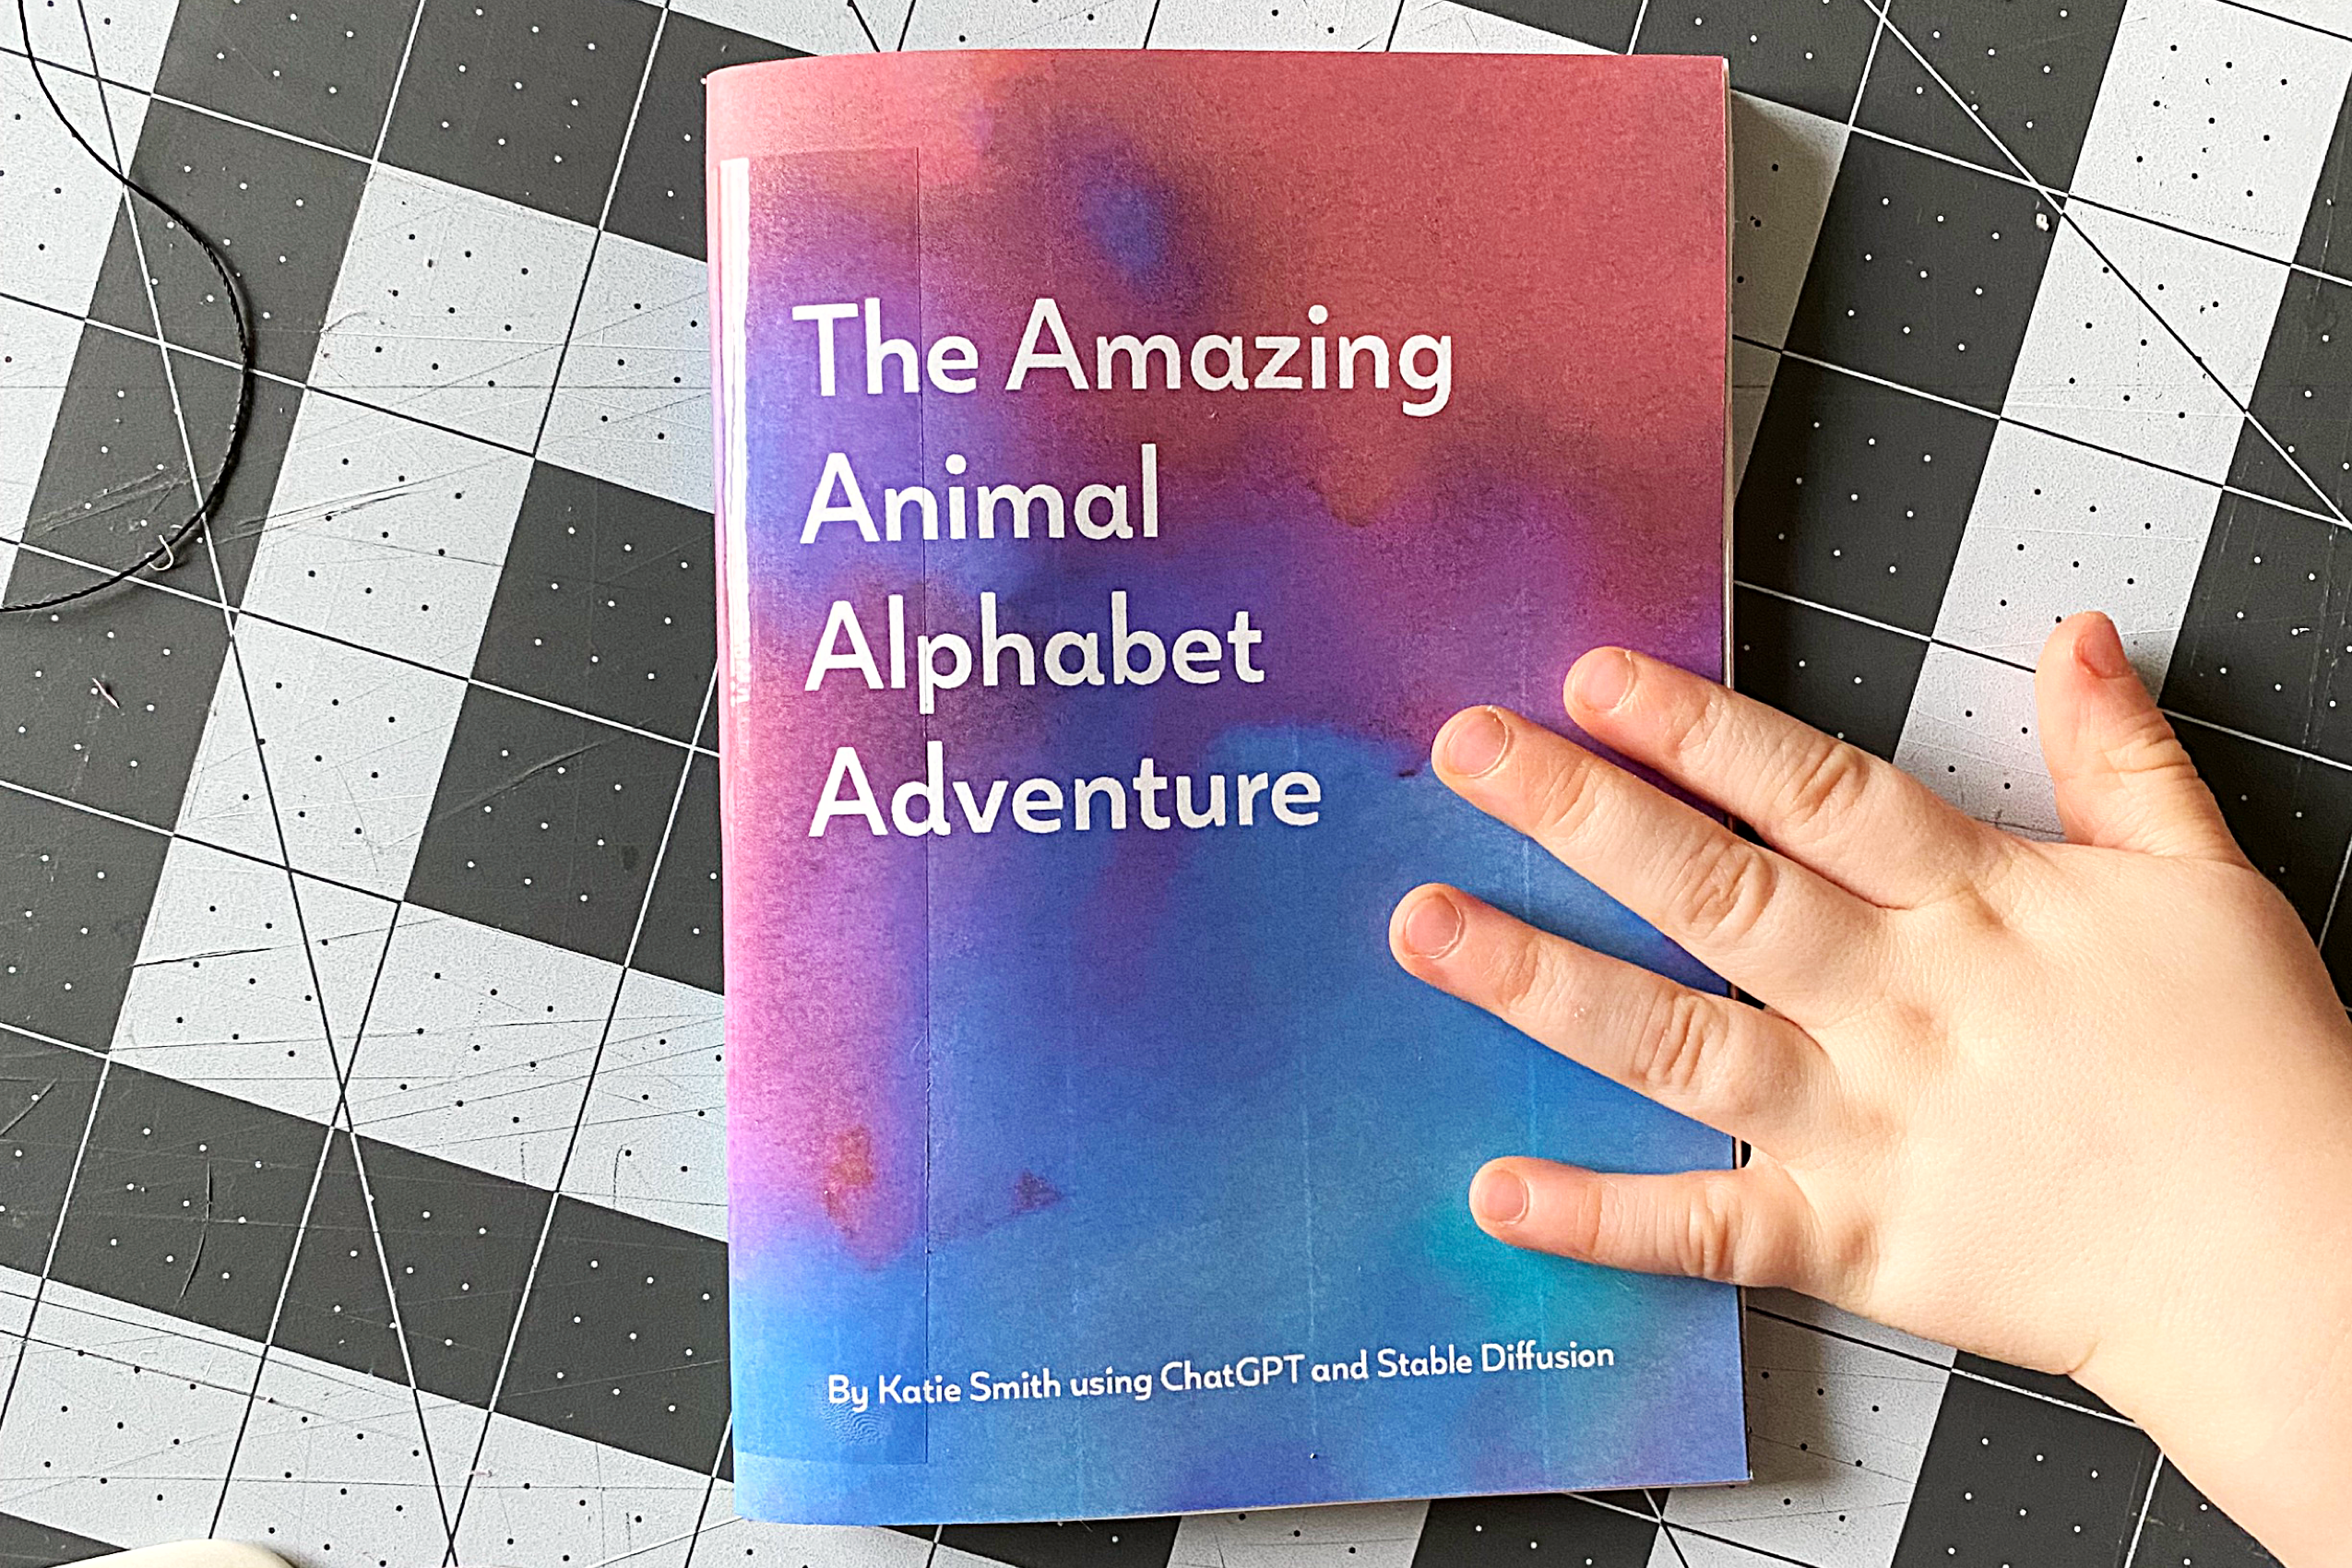 &ldquo;The Amazing Animal Alphabet Adventure&rdquo; book with a little boy&rsquo;s hand grabbing it off the table.